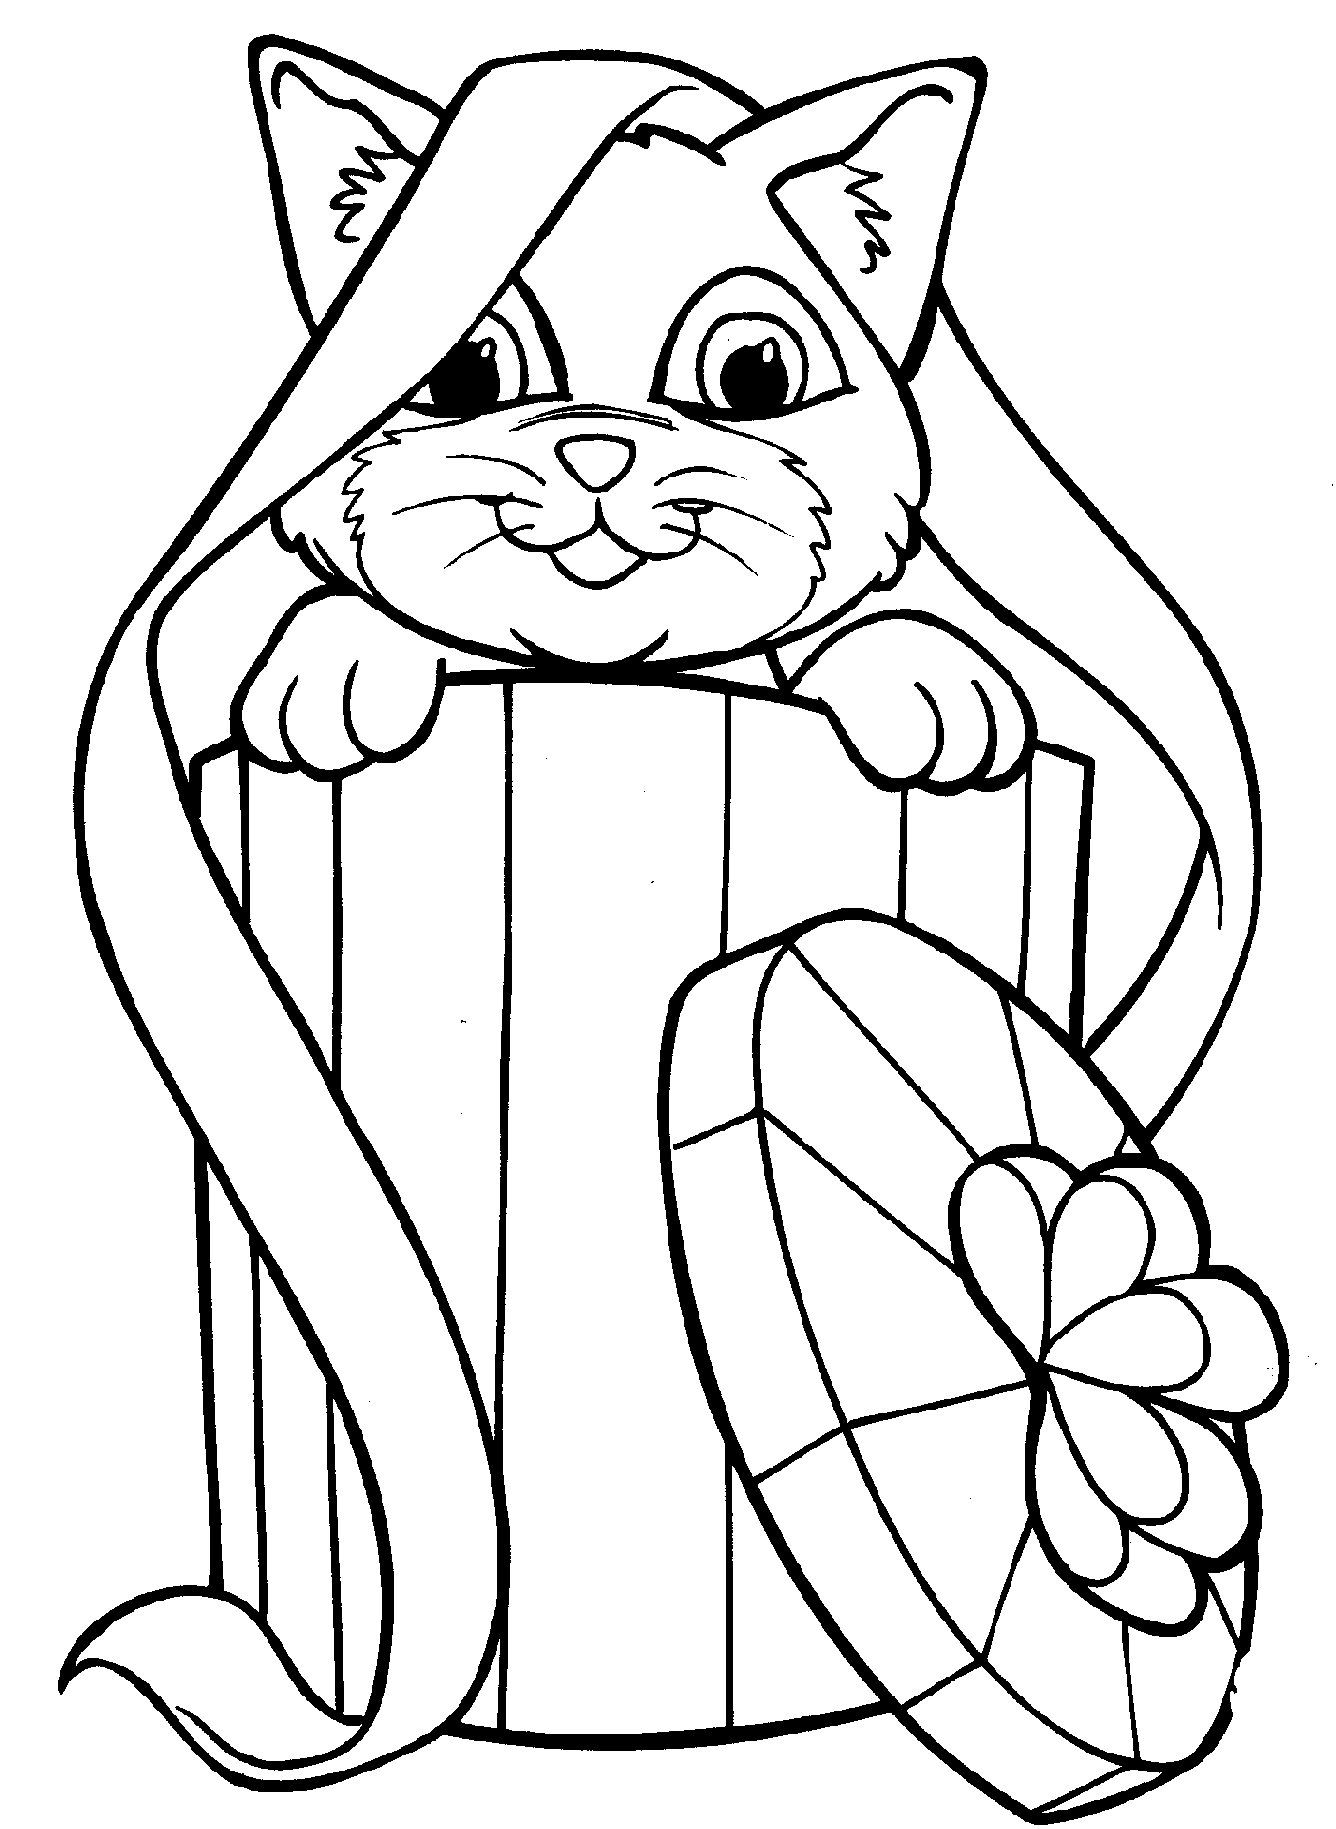 Apostrophe Coloring Page - Coloring Pages For All Ages